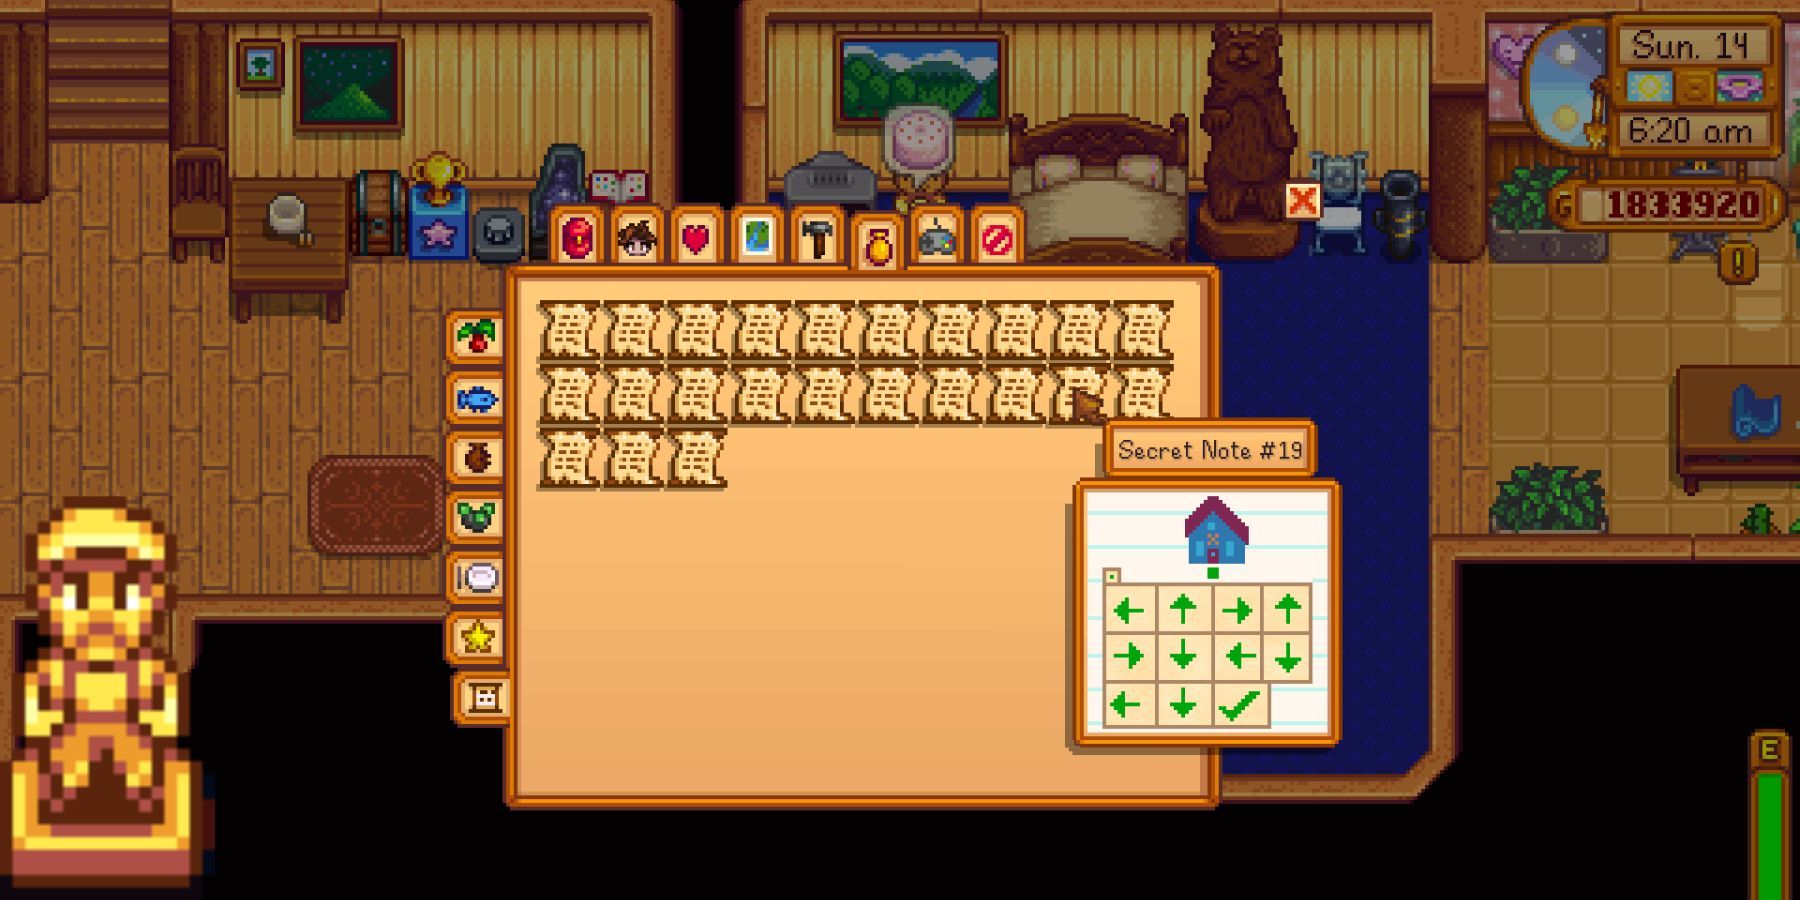 How To Get Every Secret Statue In Stardew Valley